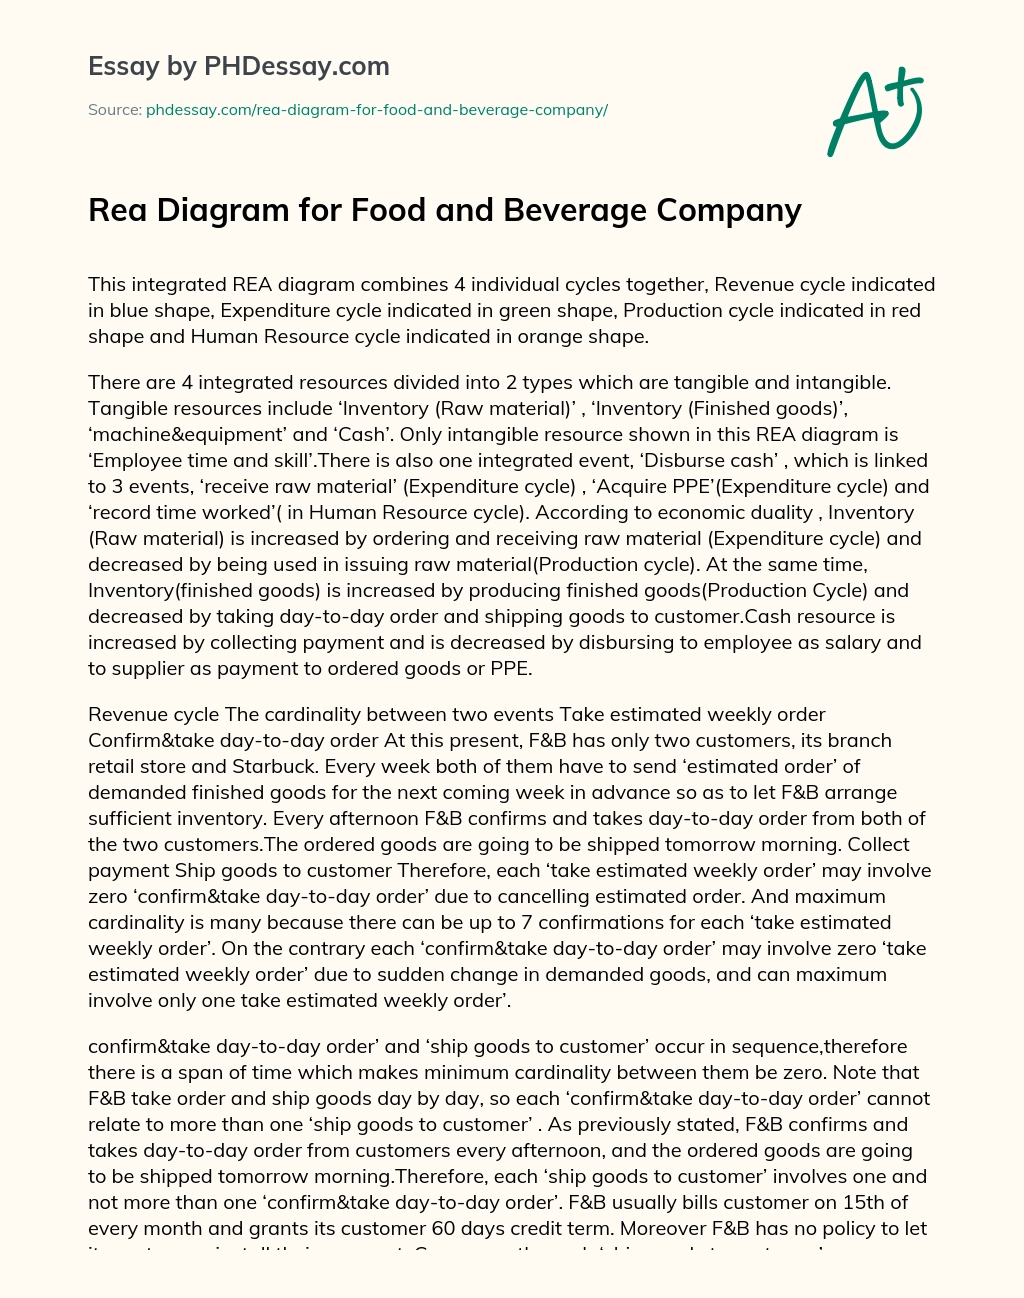 Rea Diagram for Food and Beverage Company essay